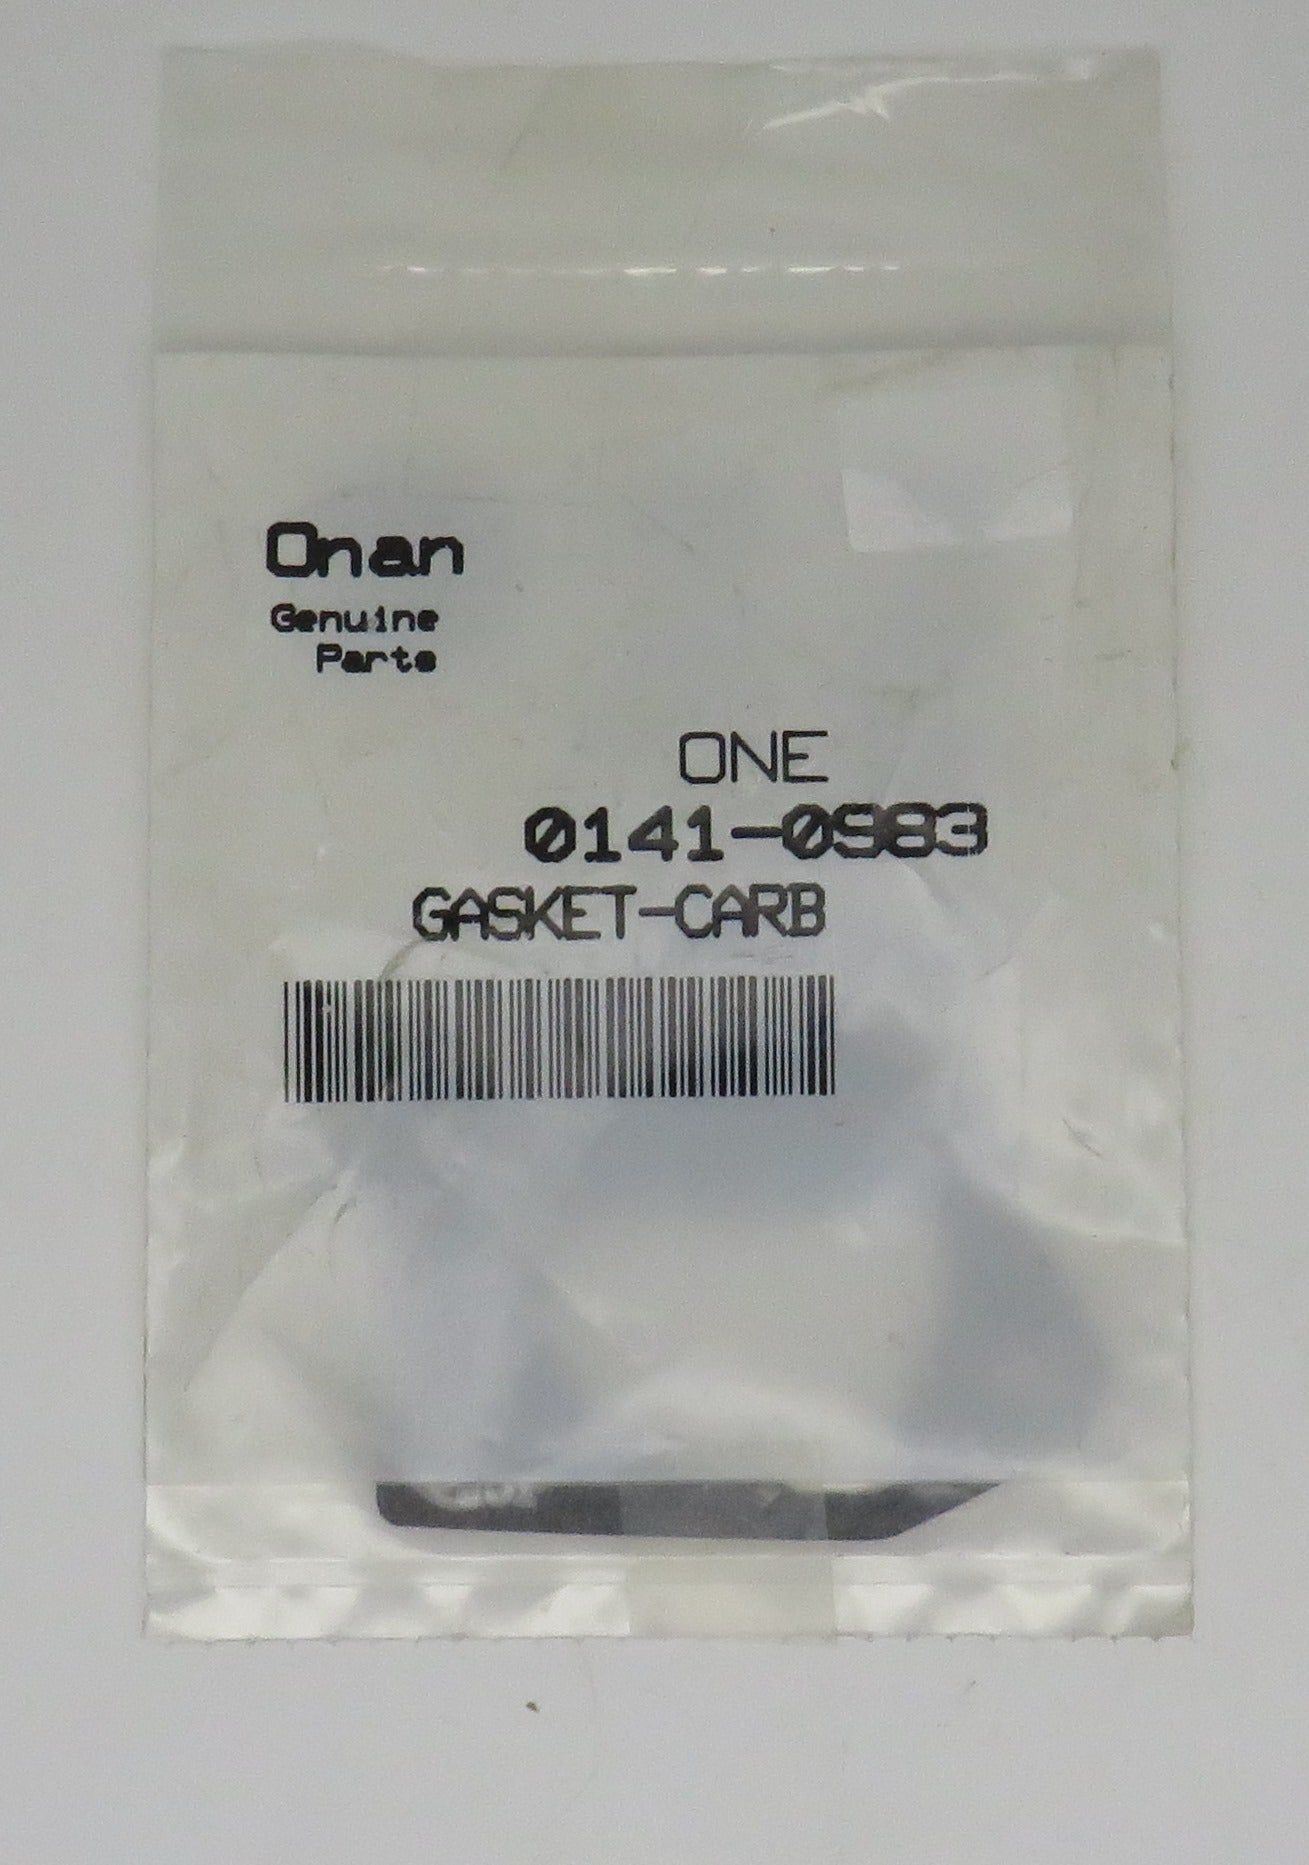 141-0983 Onan Carb Gasket. This Gasket goes with Carb kit A040N099 (Requires 1) 